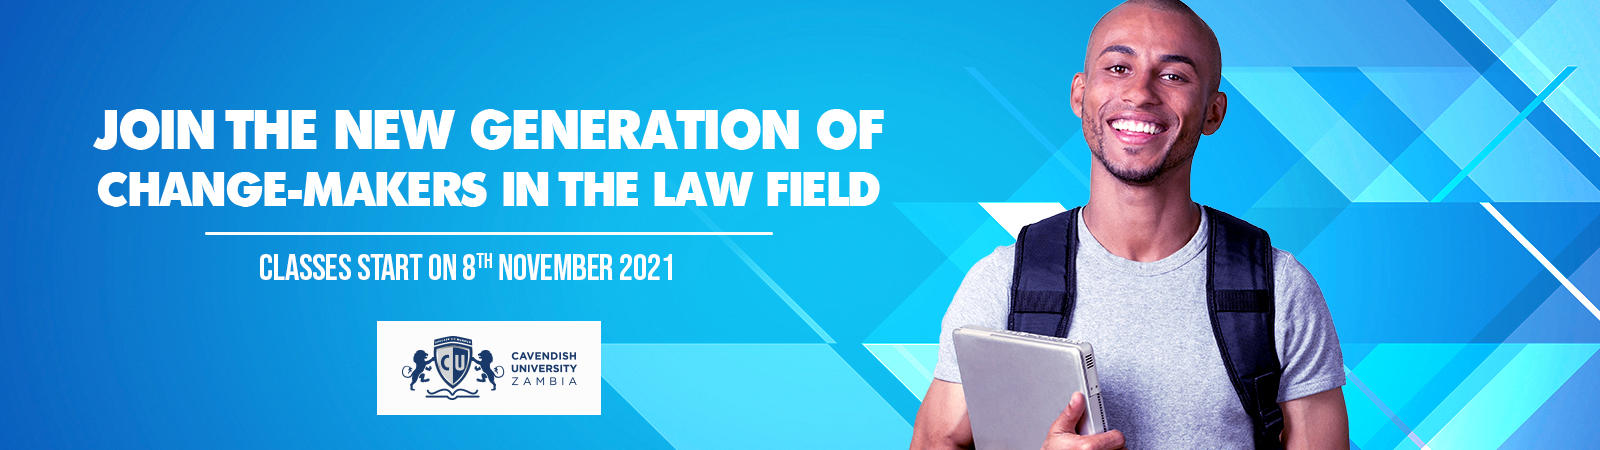 Join the new generation of change-makers in the law field